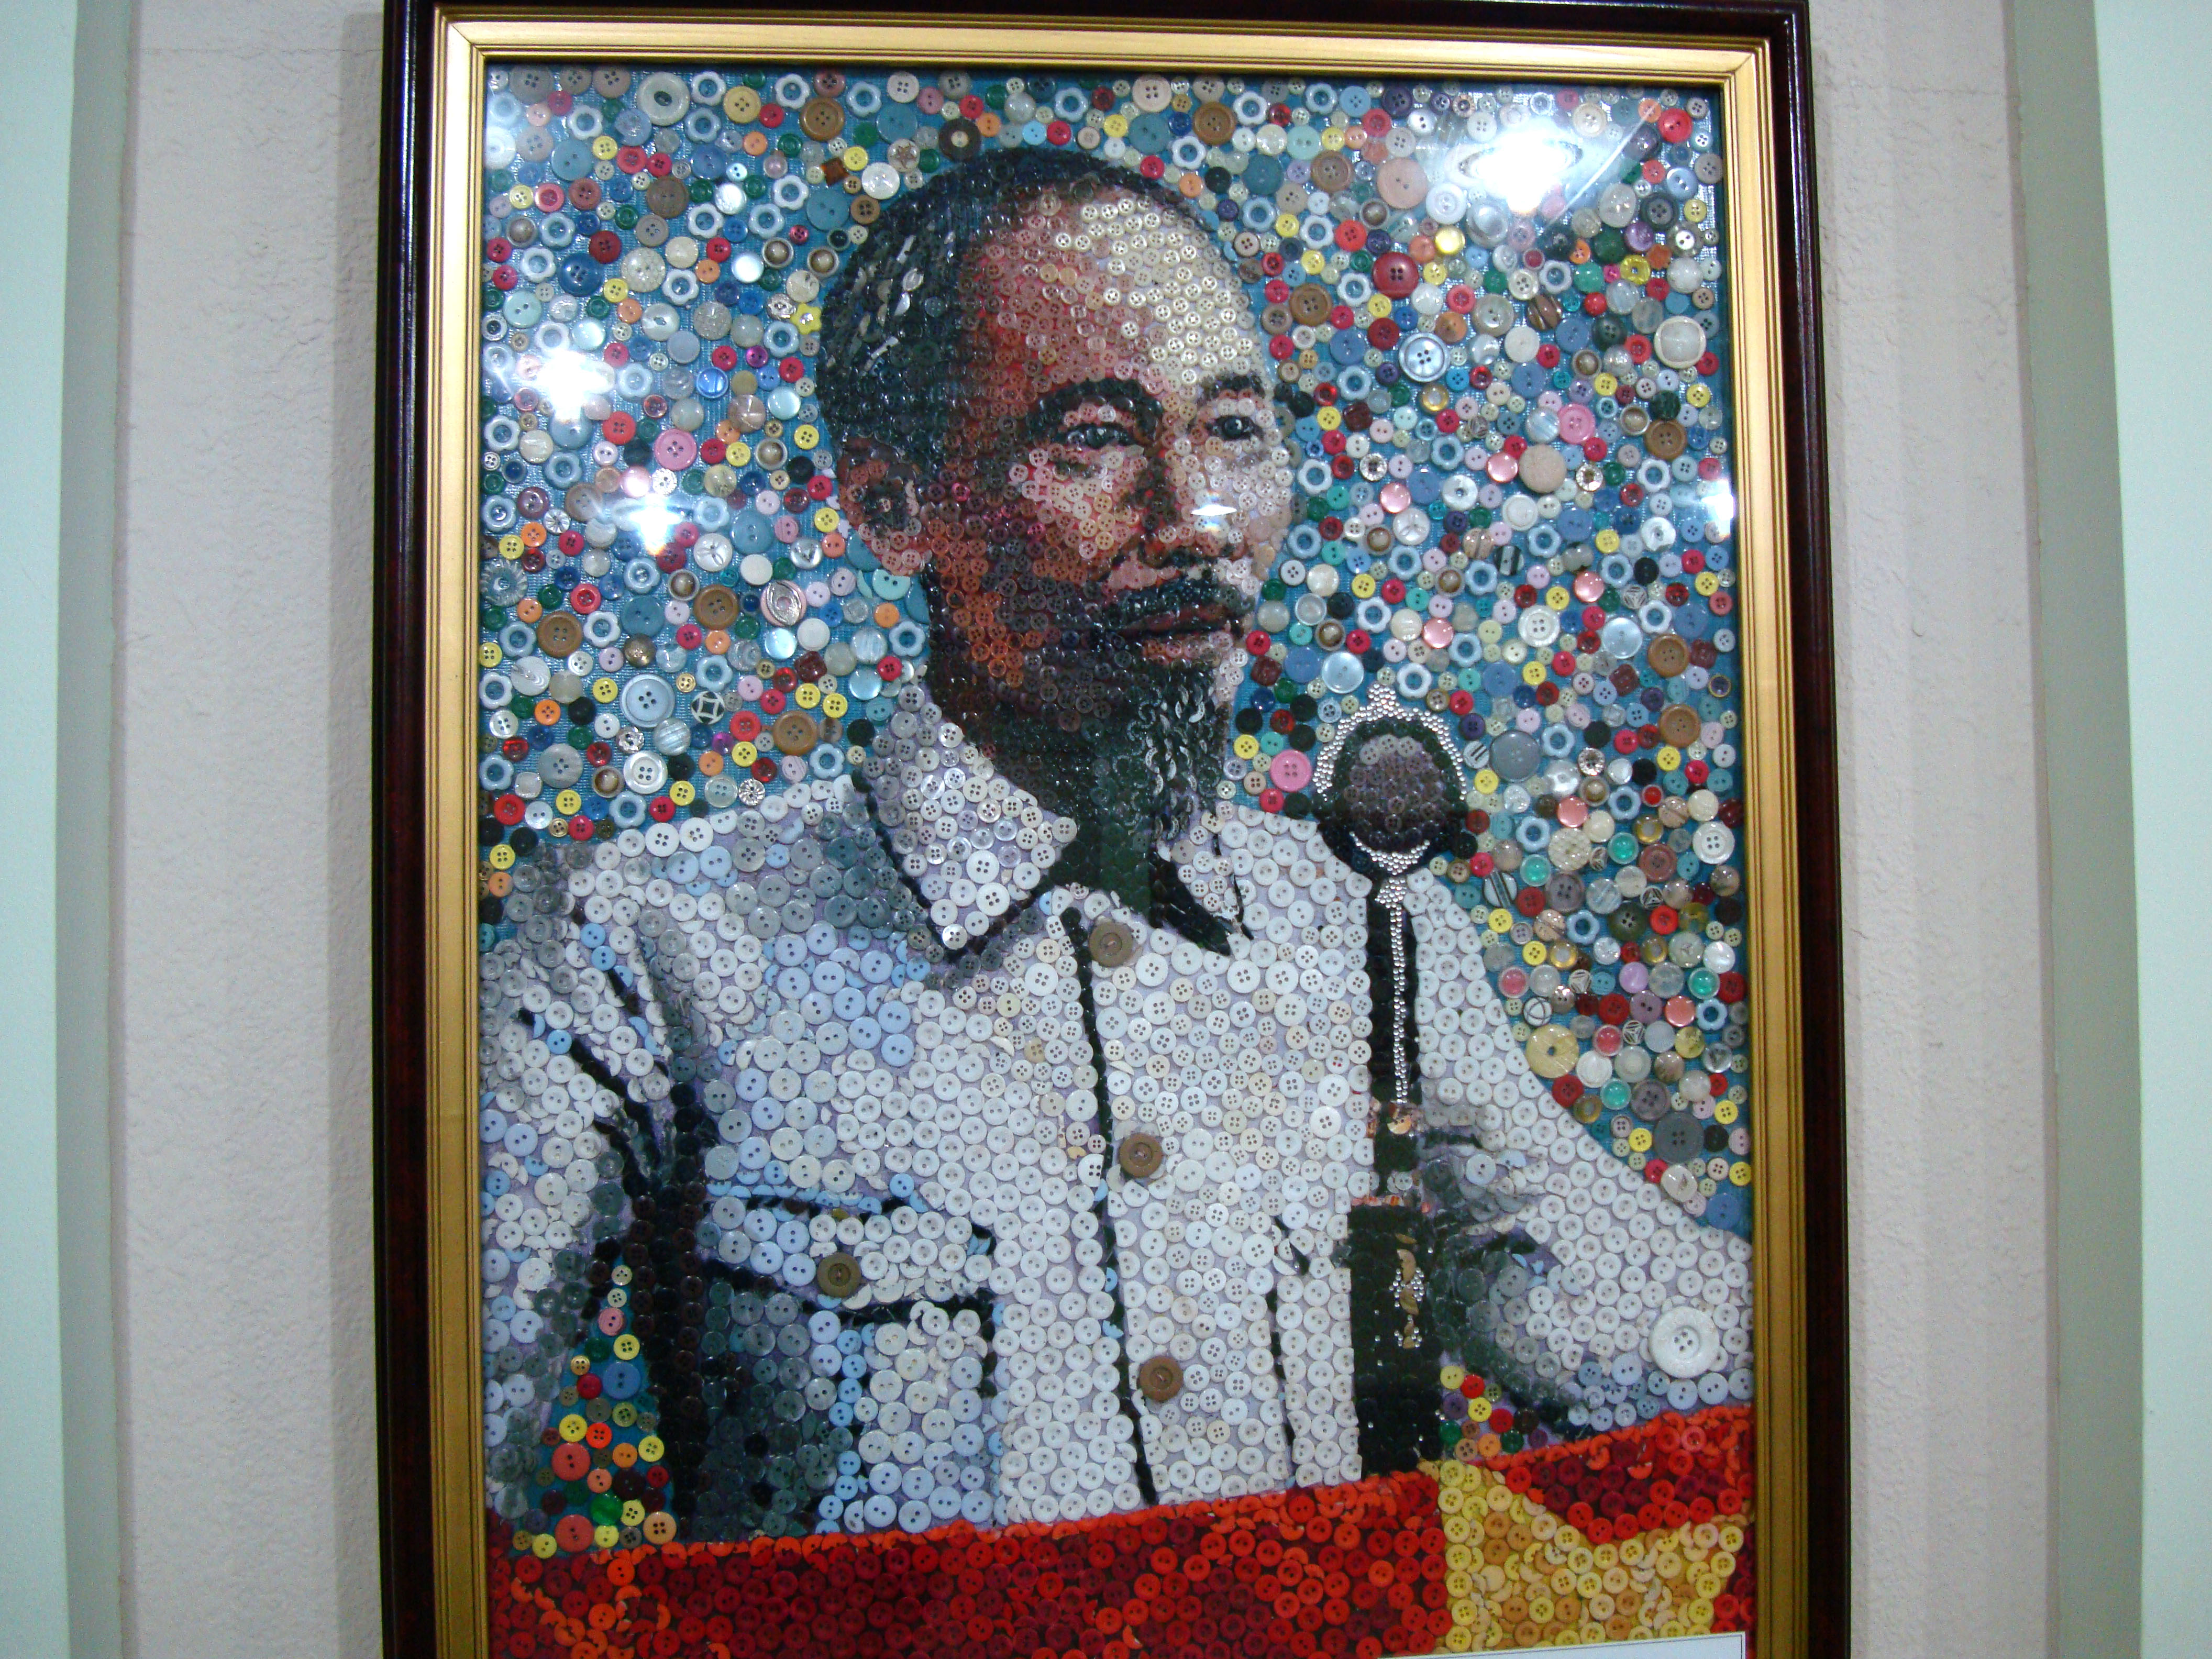 HCMC Nha Rong Quay Museum paintings done with buttons 2009 03